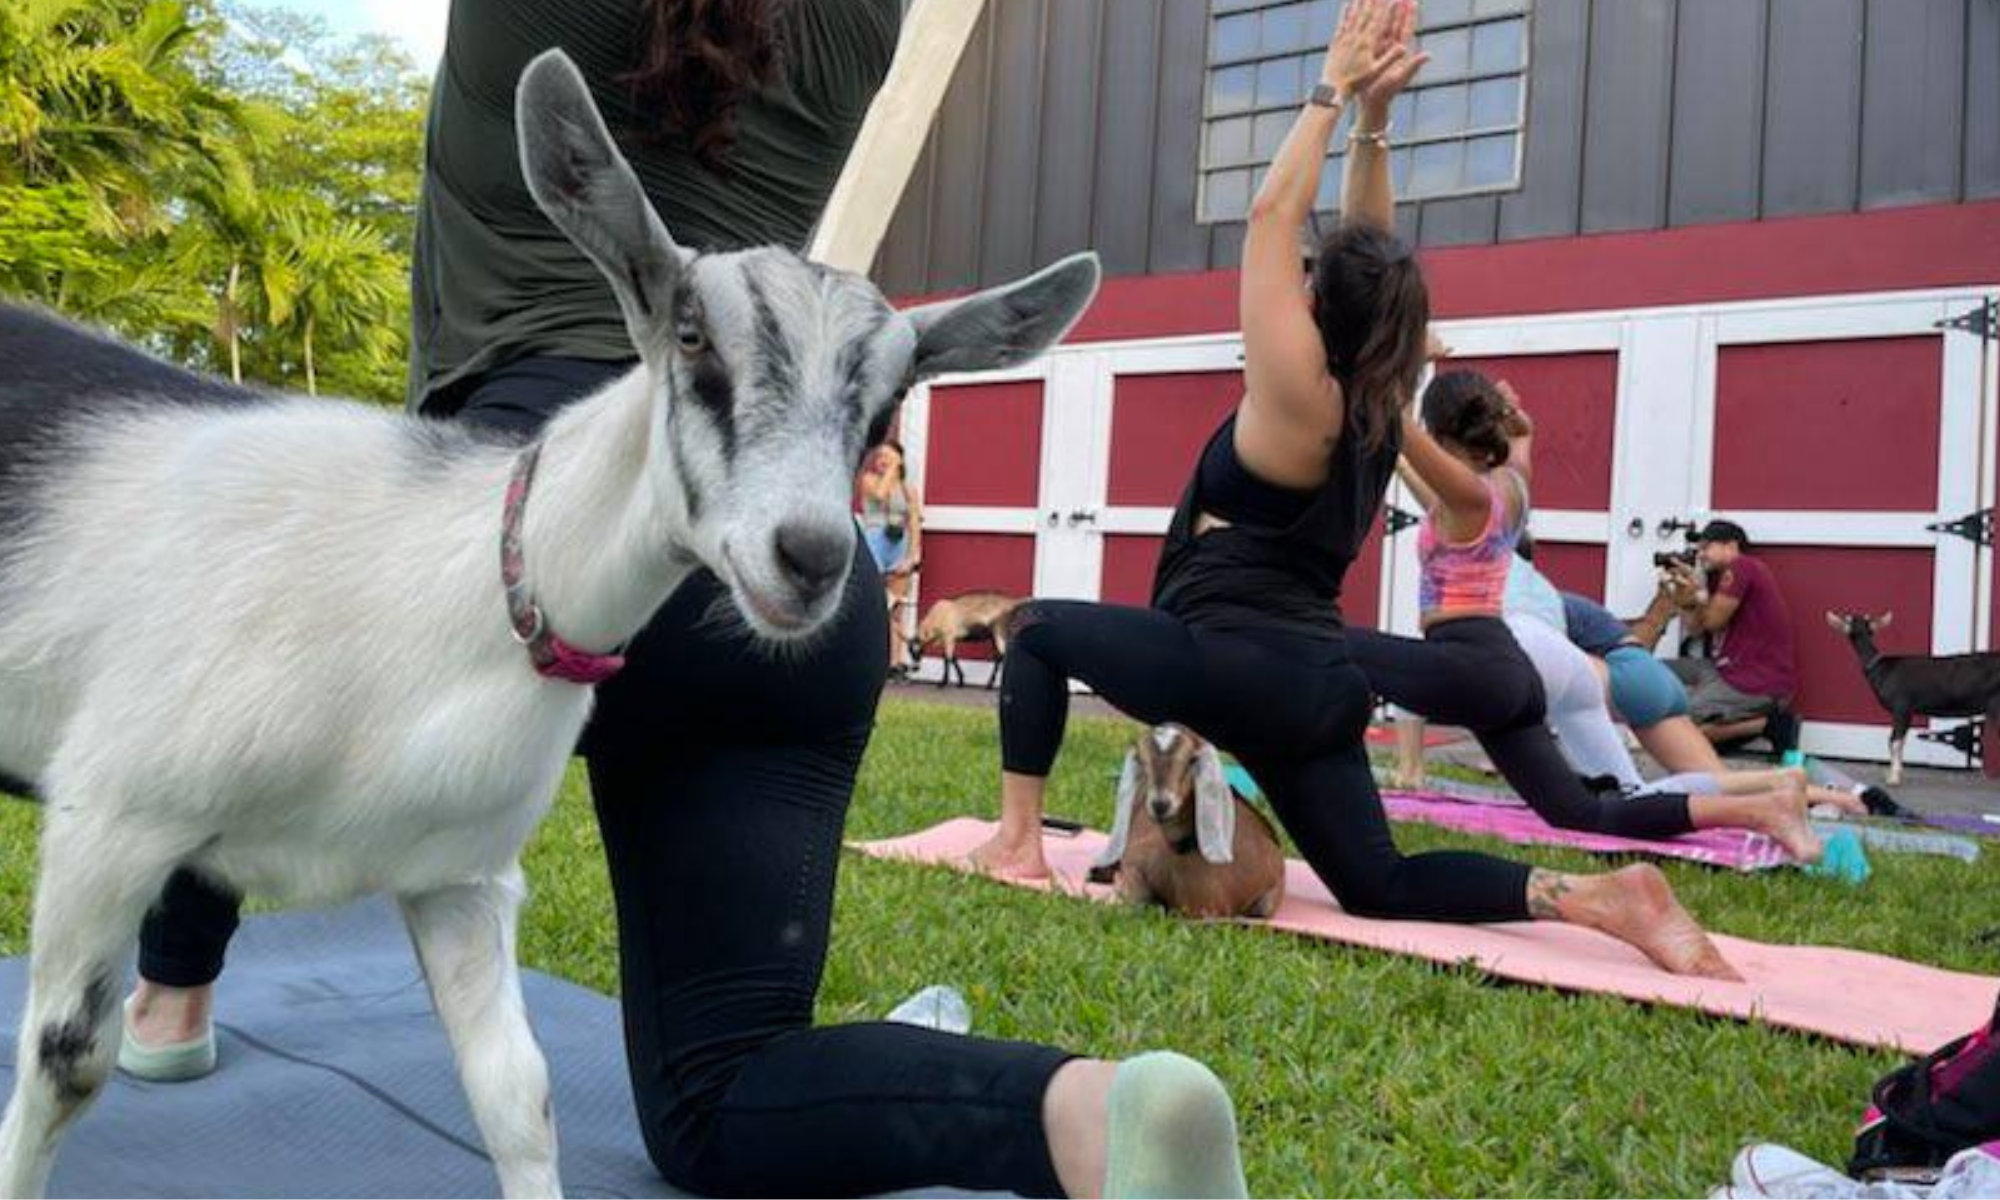 Cute white goat poking its head at the camera during a yoga sessioin. Red barn in the background and three ladies in a yoga pose. Things to Do Near Me